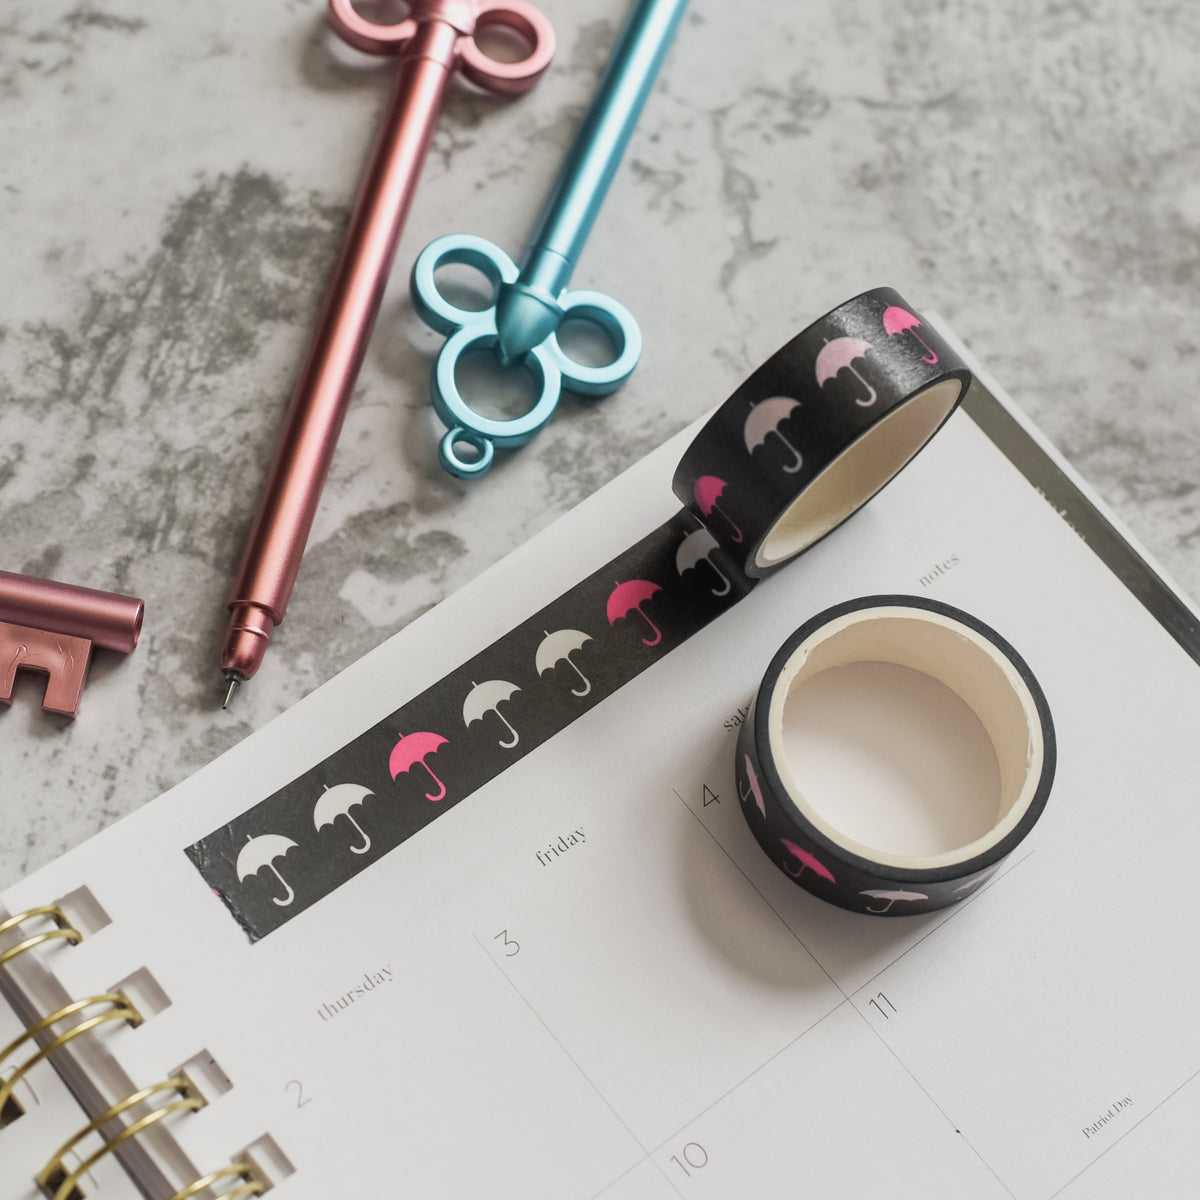 Umbrella Academy Washi Tape is a black roll of washi tape with gray, white, and pink umbrellas